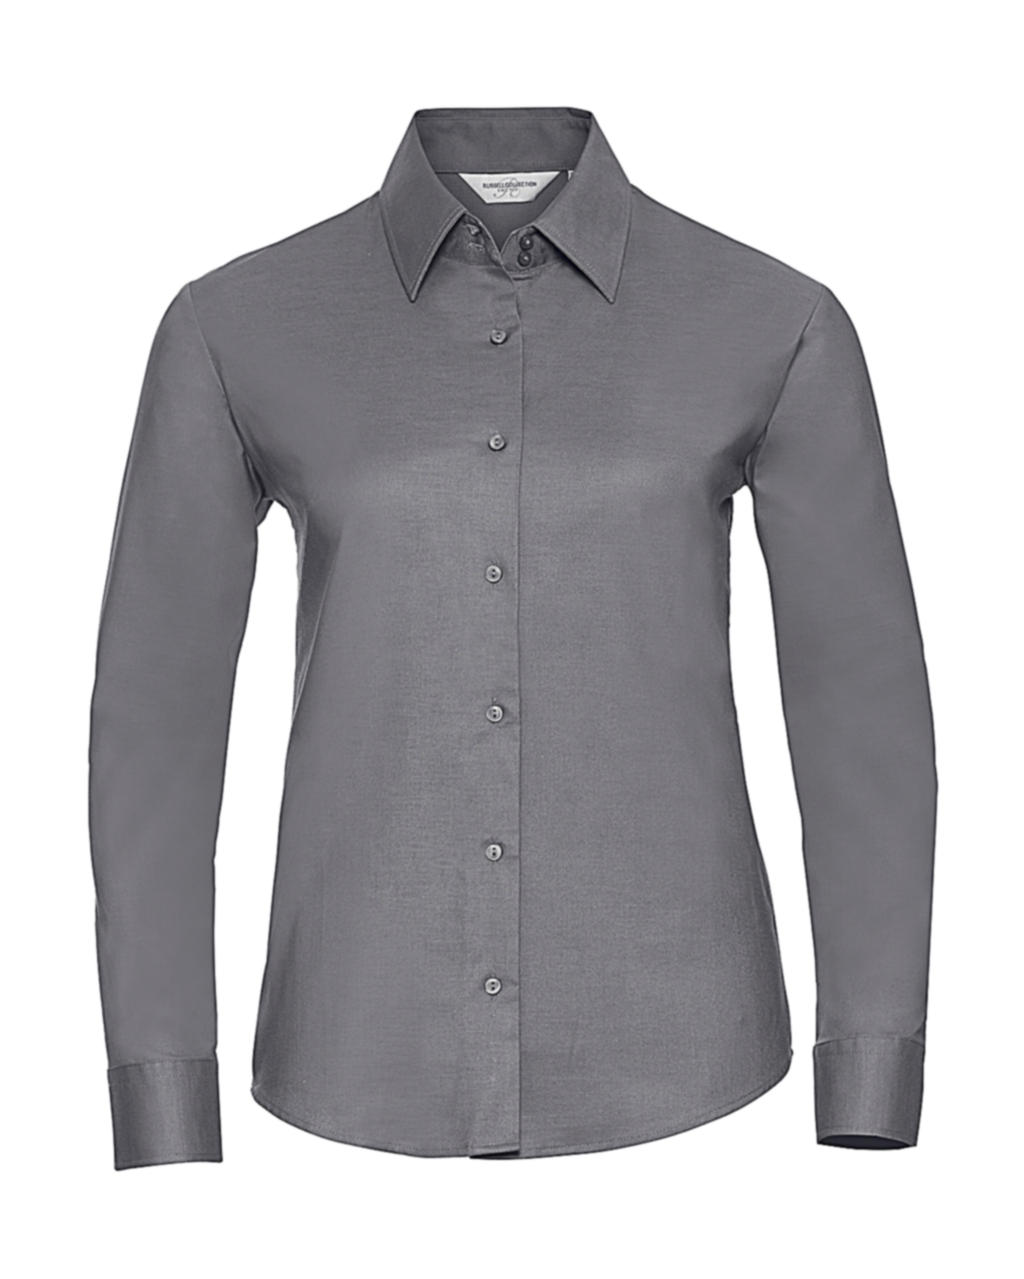  Ladies Classic Oxford Shirt LS in Farbe Silver